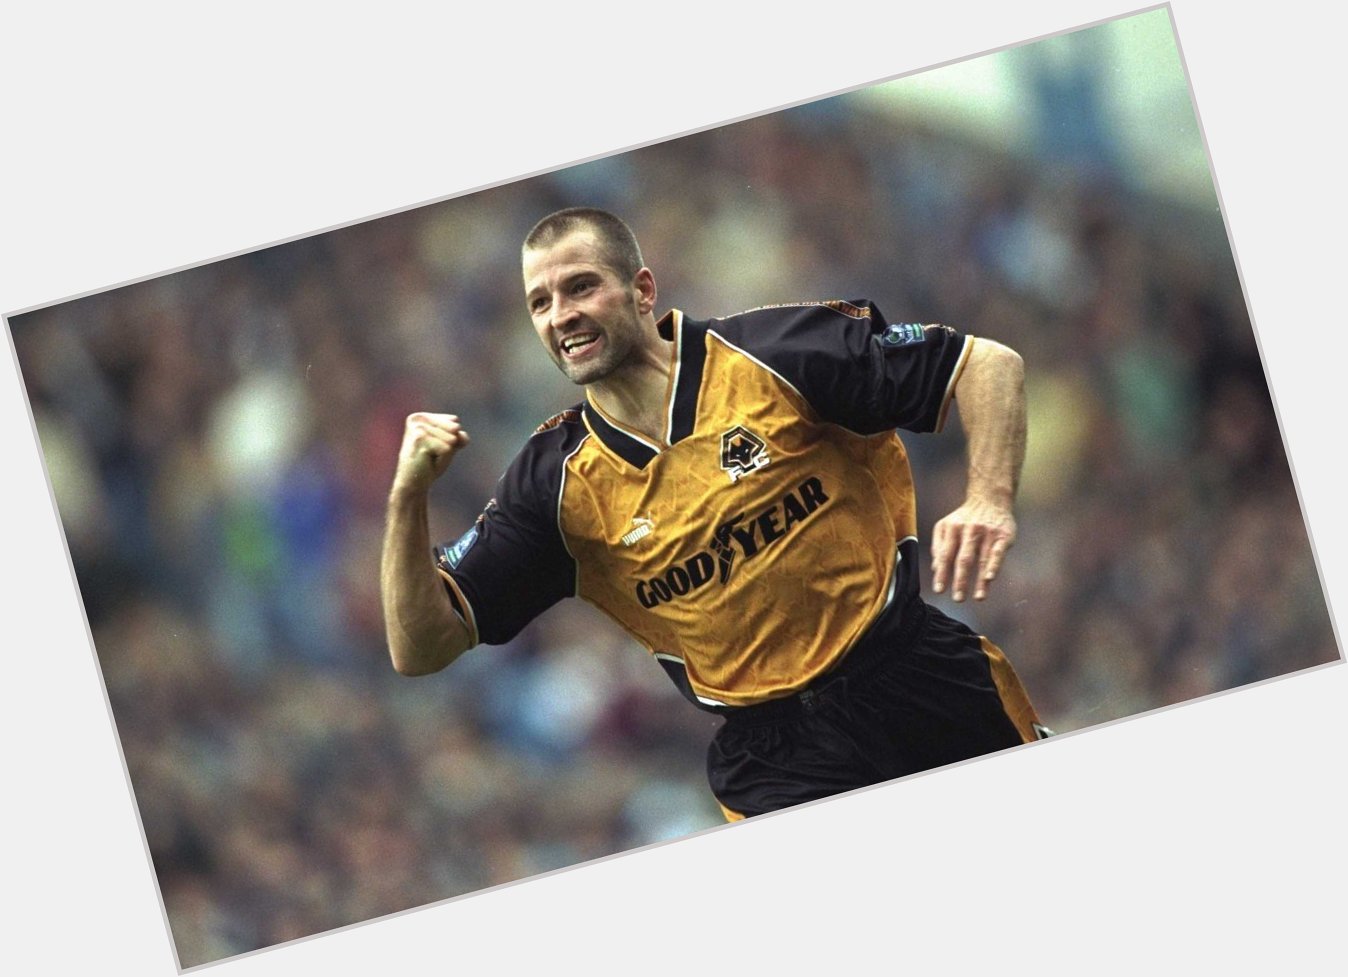  A very happy birthday to the one and only Steve Bull, have a great day Bully!  